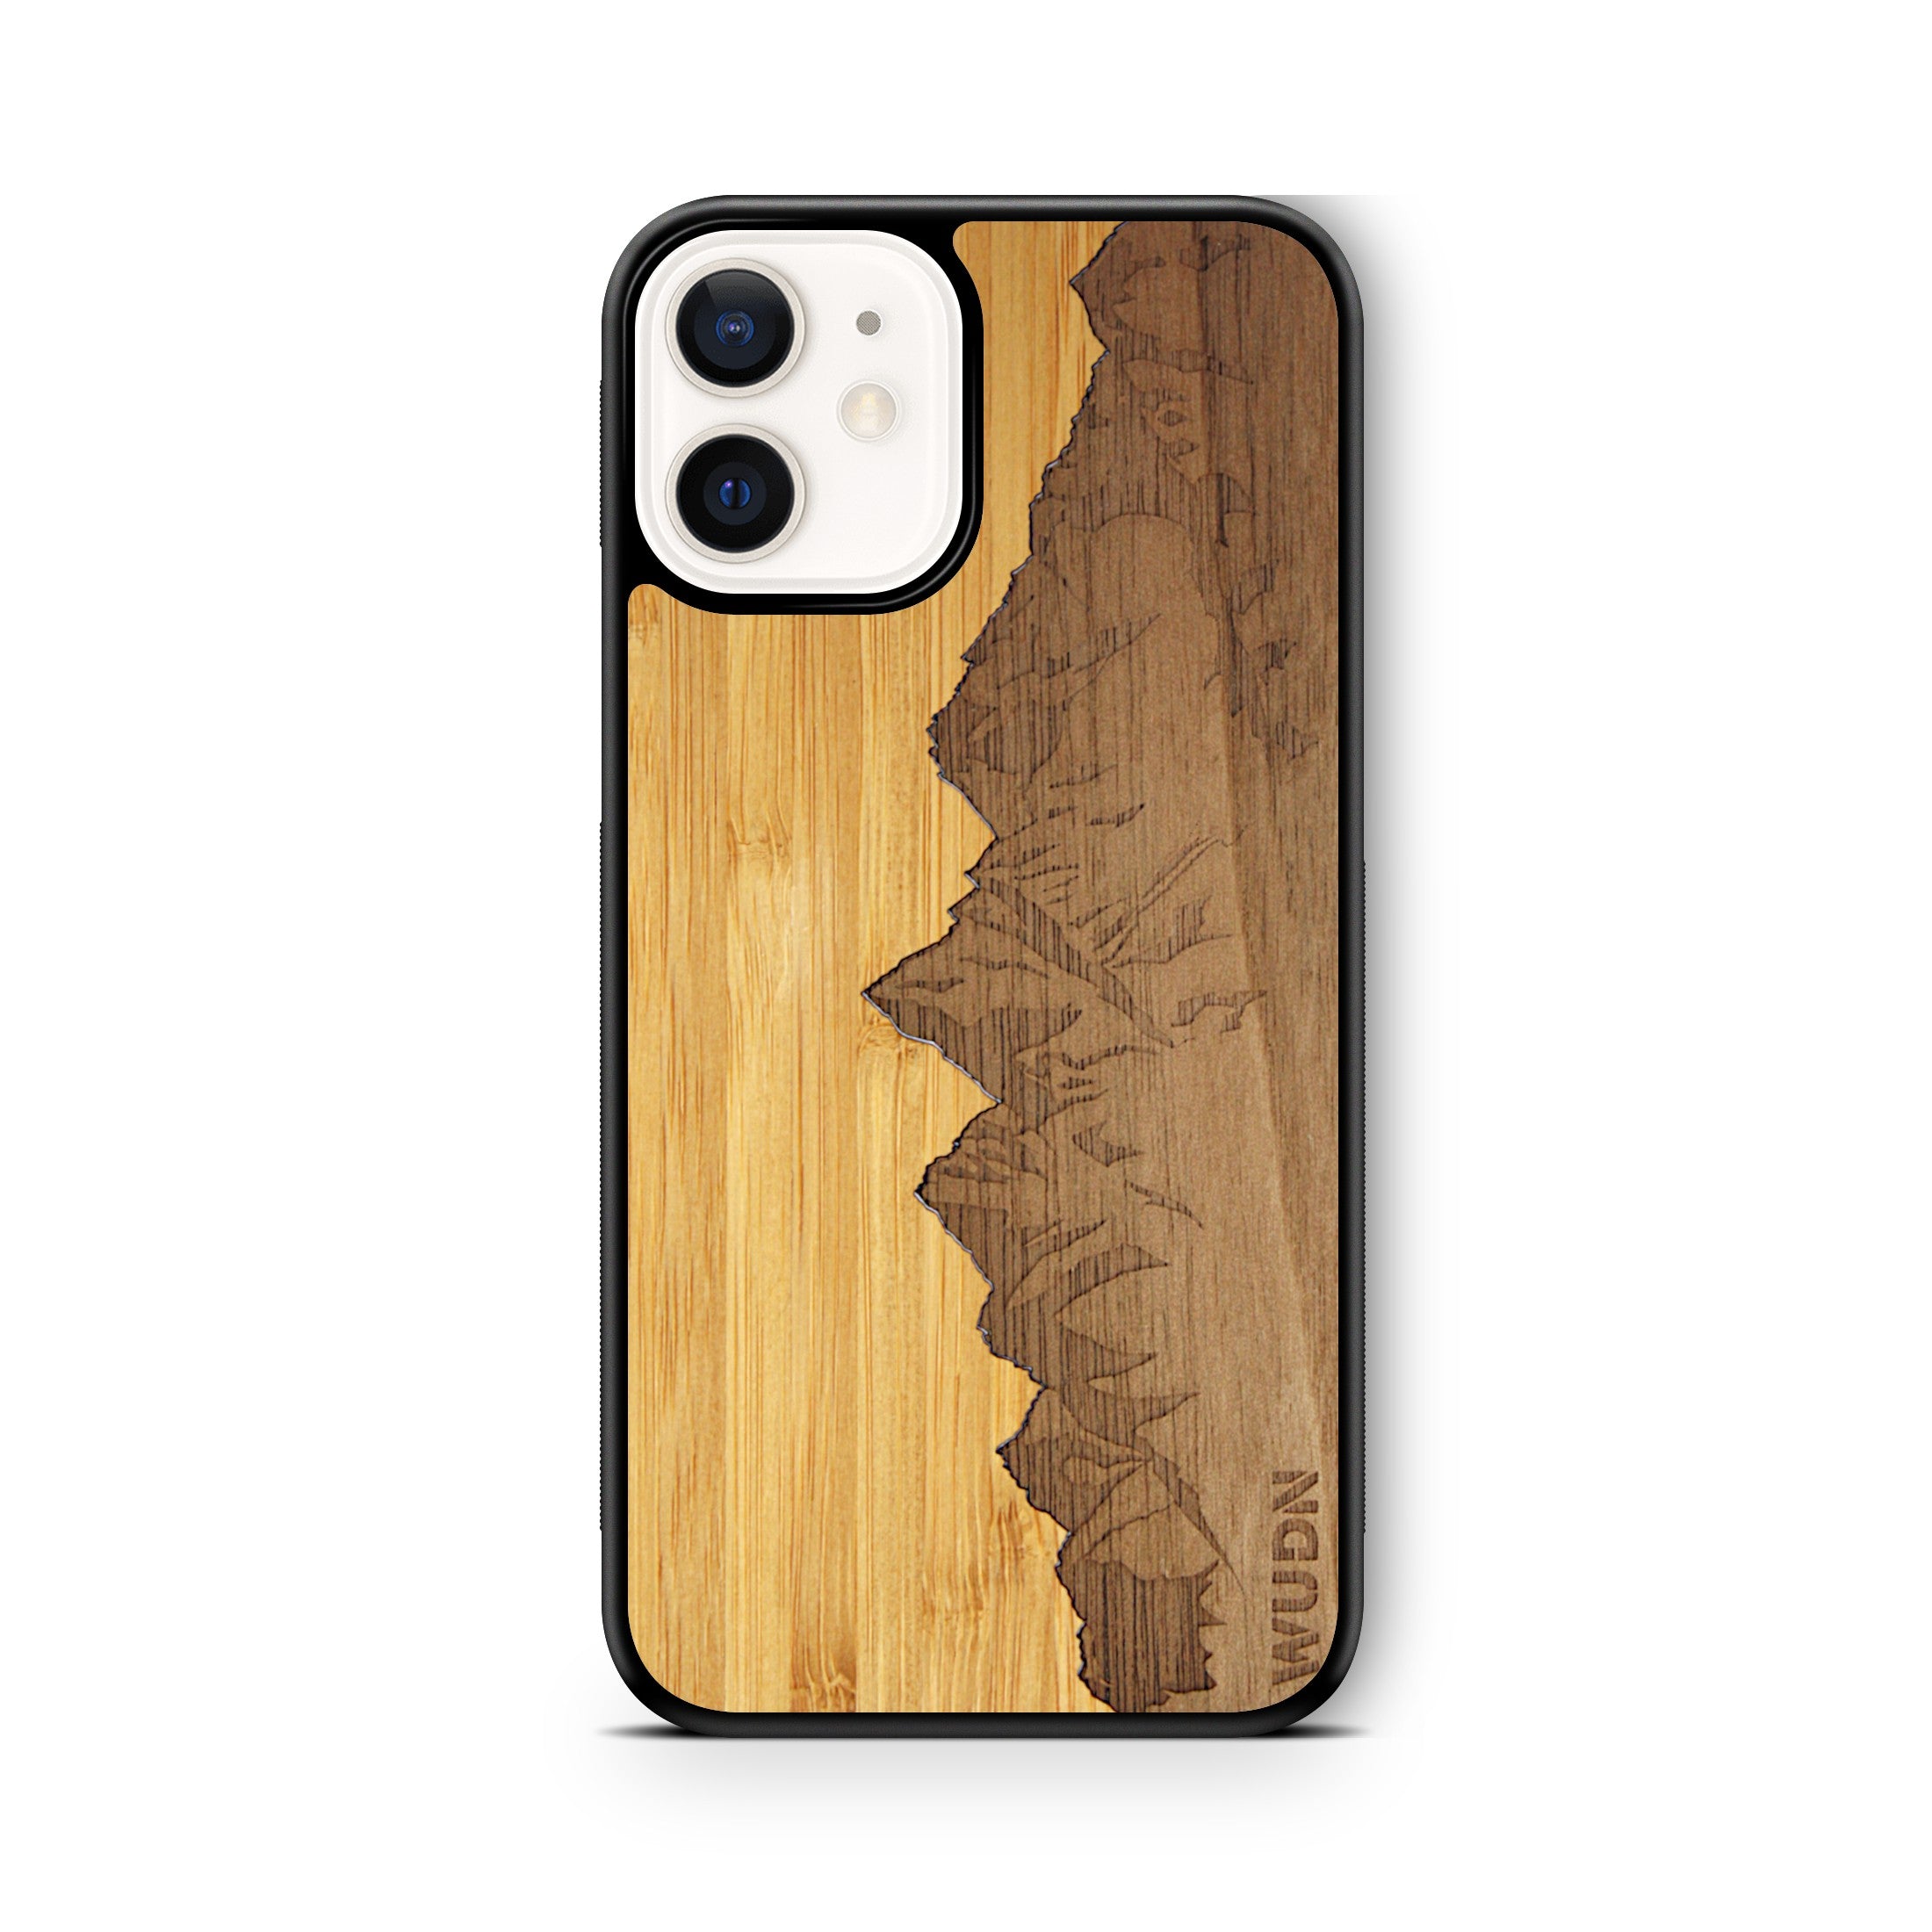 Slim Wooden Phone Case | Sawtooth Mountains Traveler, Cases by WUDN for iPhone 12 (6.1")